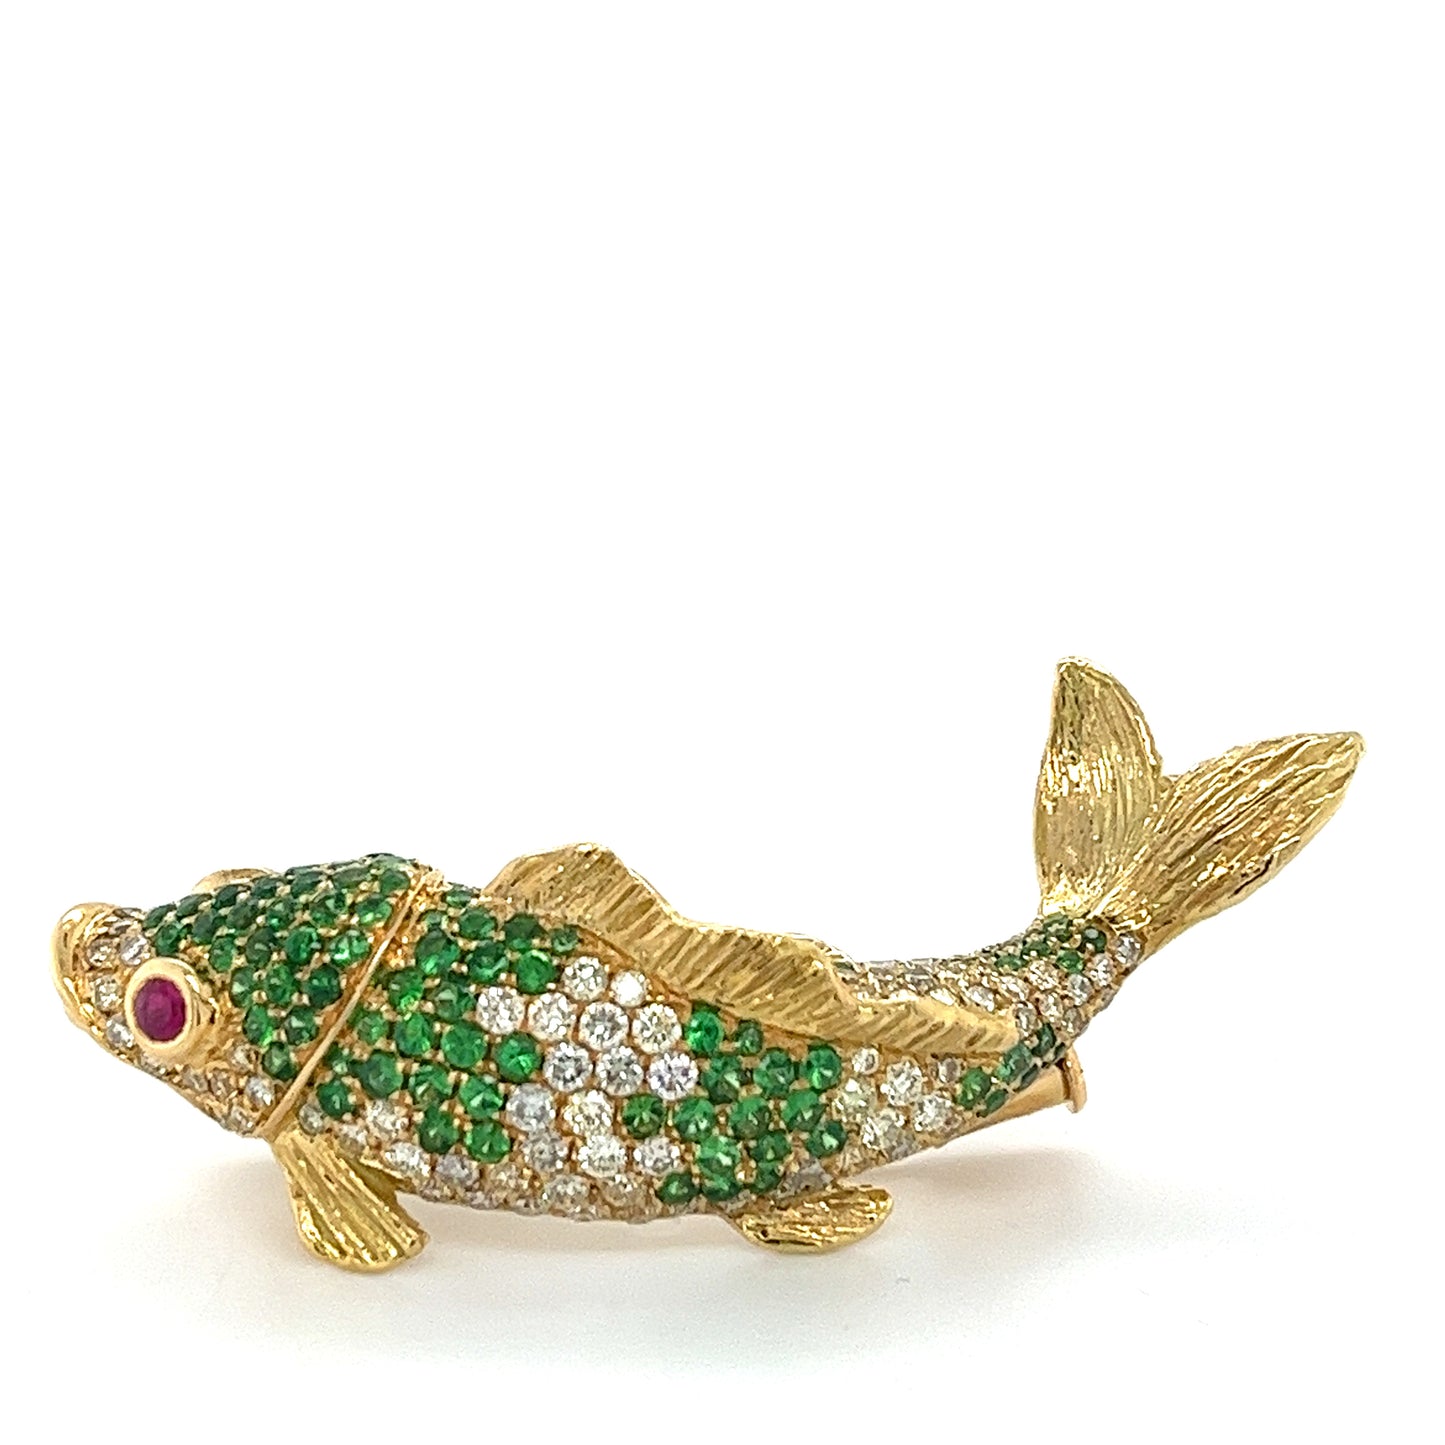 Load image into Gallery viewer, 18K Gold Fish Brooch with Diamonds Green Garnets and Rubies
